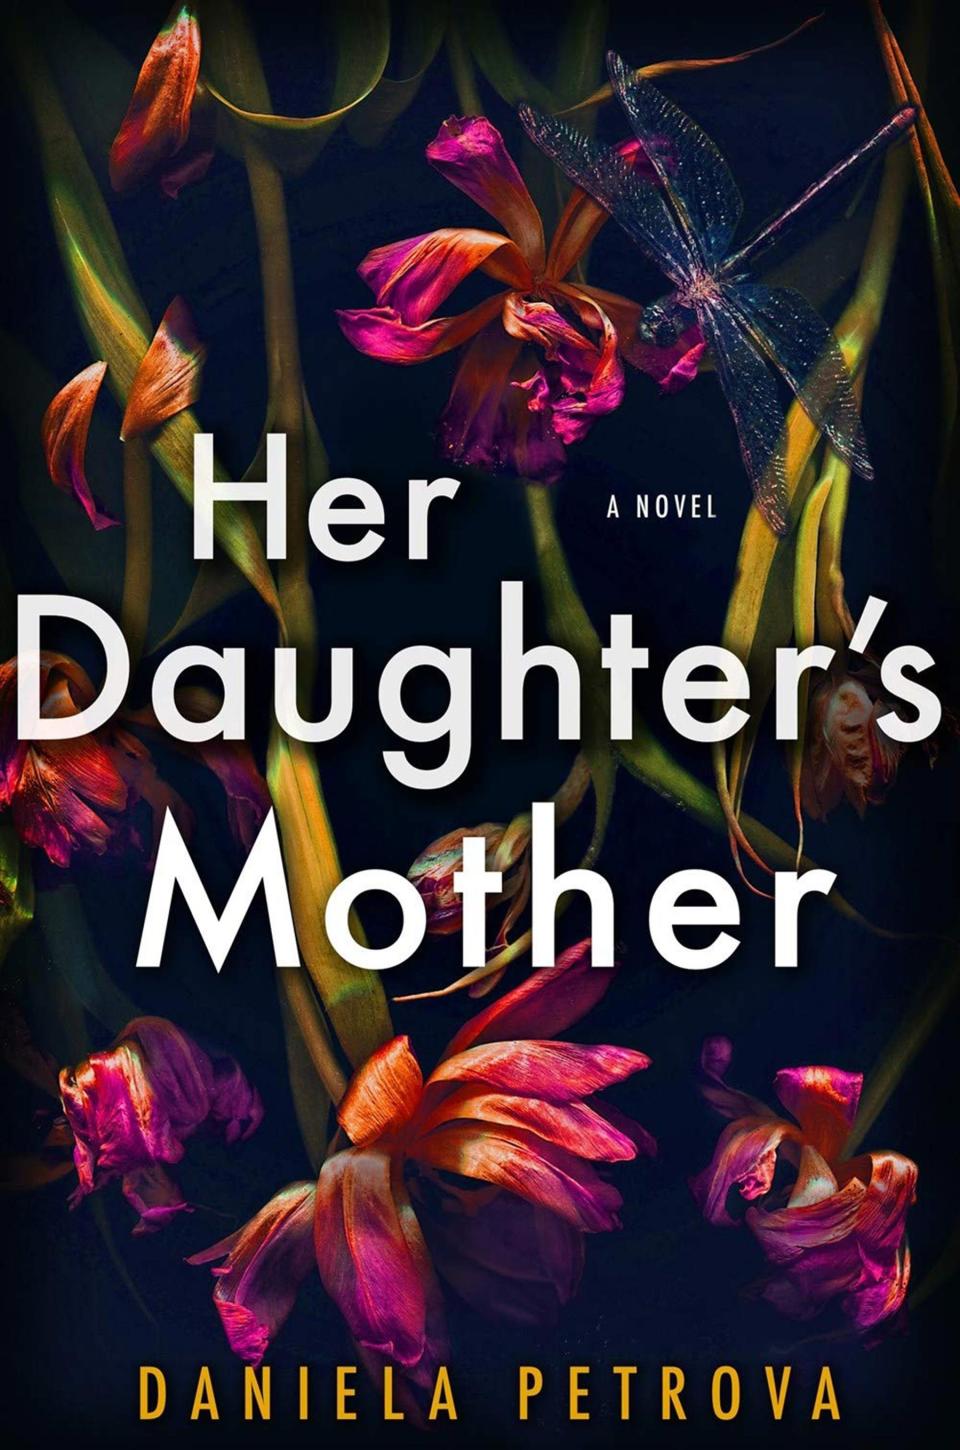 Her Daughter's Mother , by Daniela Petrova